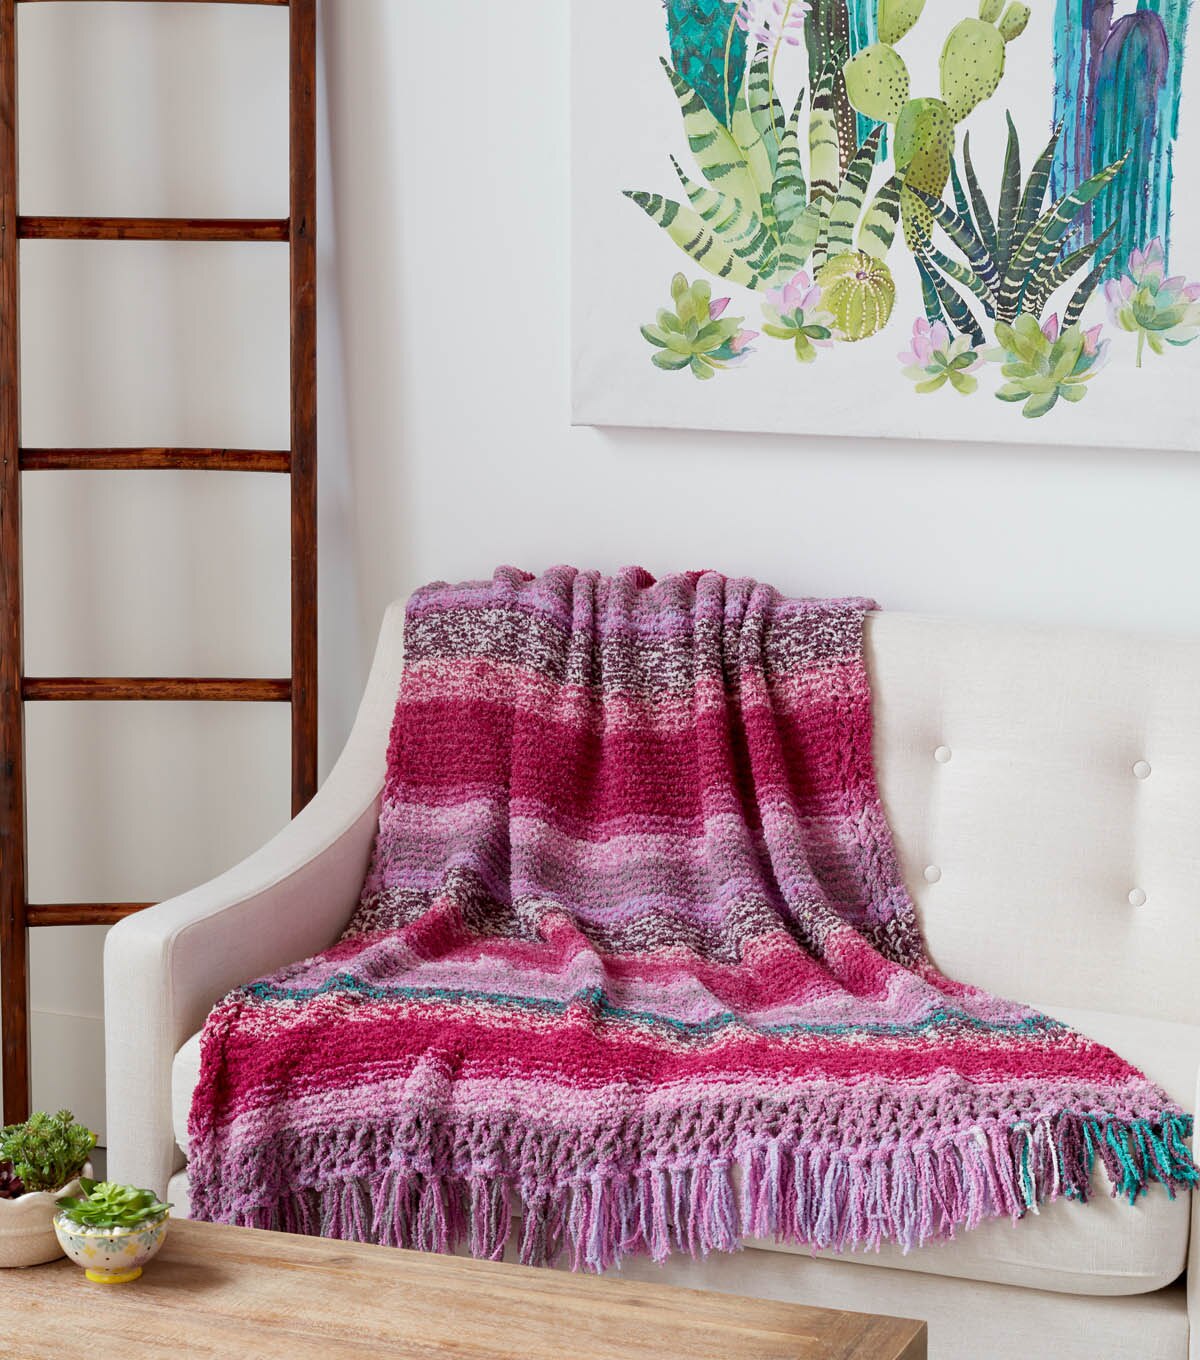 How To Make A Bernat Blanket Breezy Wrapped In Heather Knit